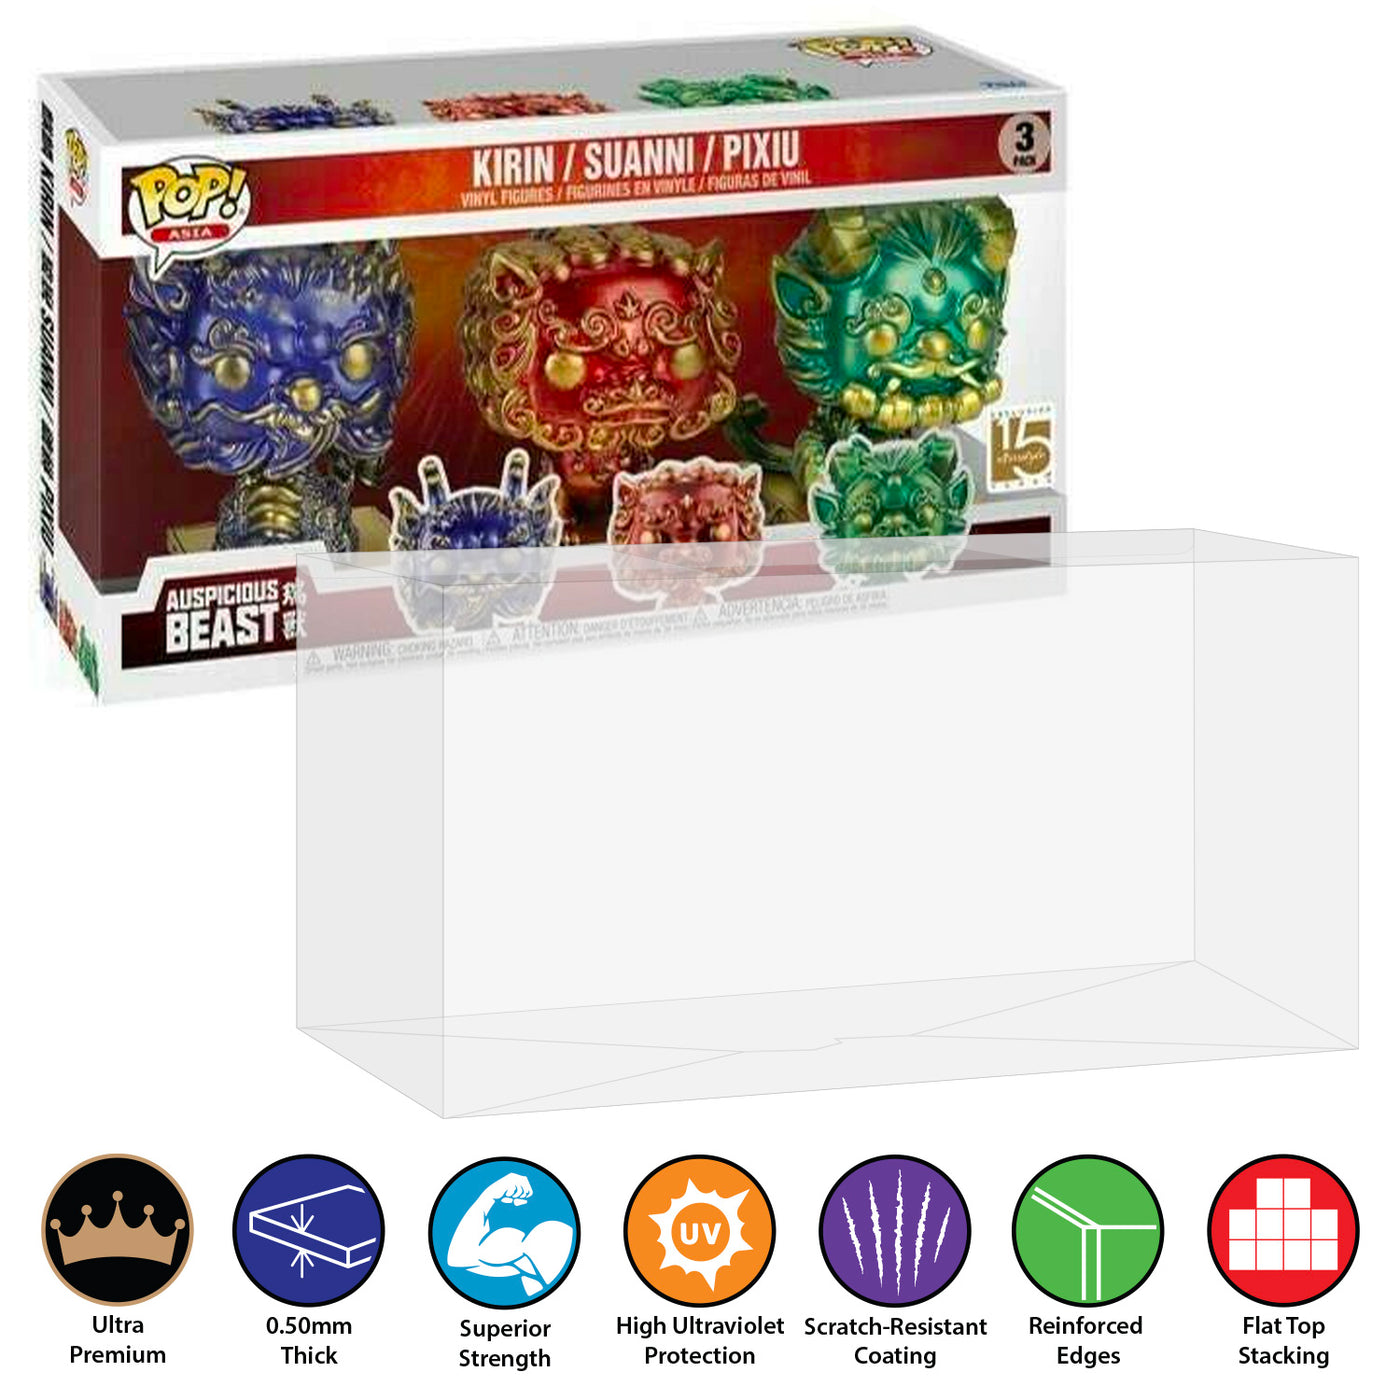 pop protector for 3 pack auspicious beast kirin suanni pixiu pop asia best funko pop protectors thick strong uv scratch flat top stack vinyl display geek plastic shield vaulted eco armor fits collect protect display case kollector protector